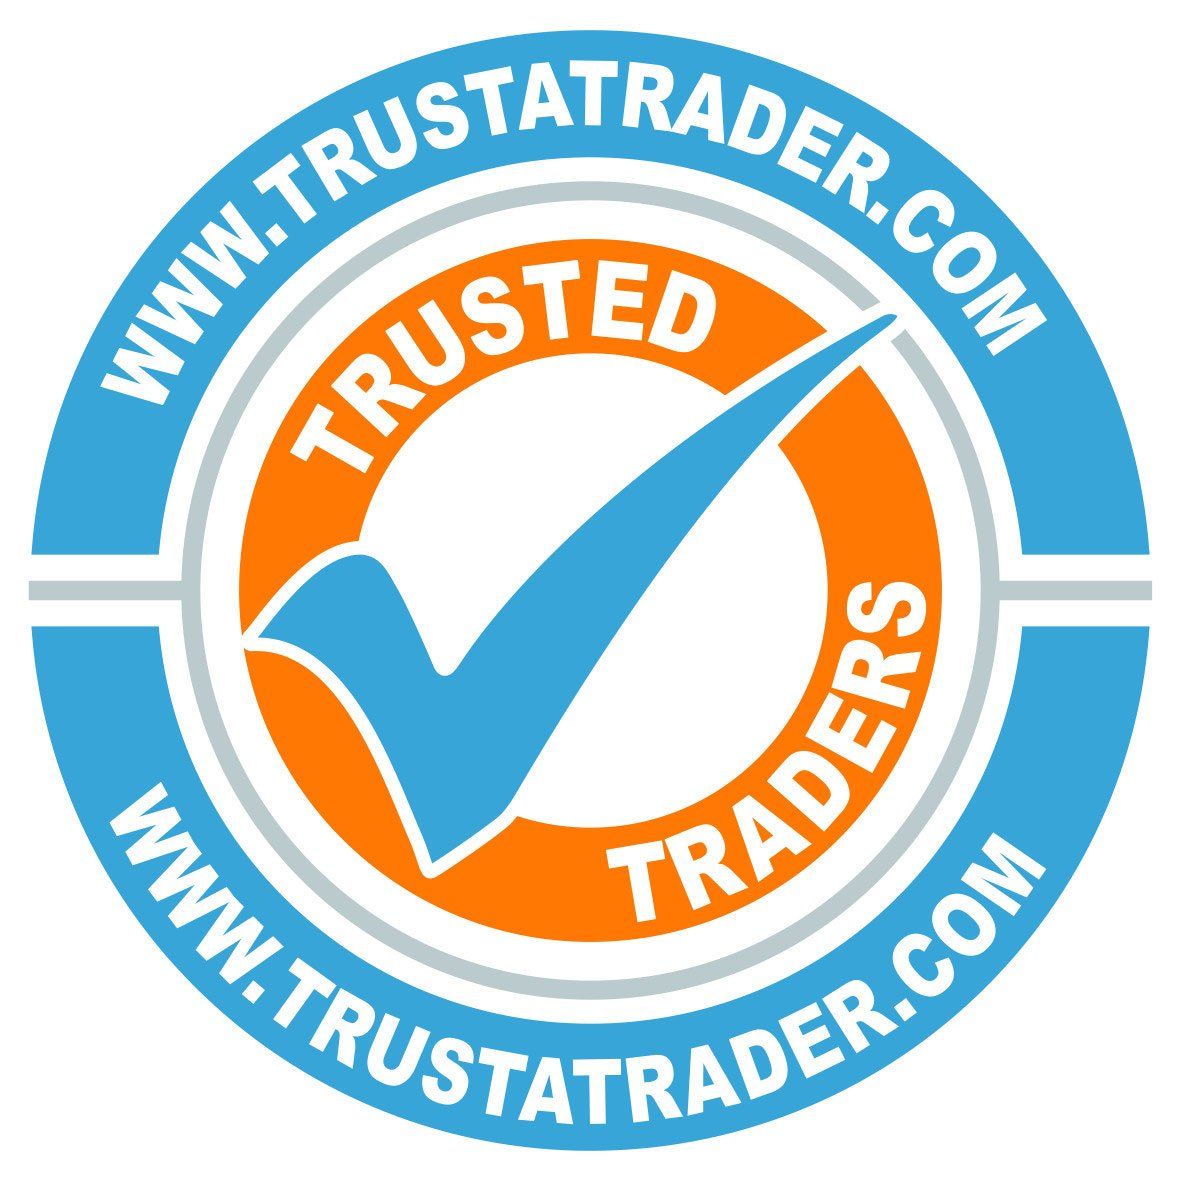 Trusted Traders logo